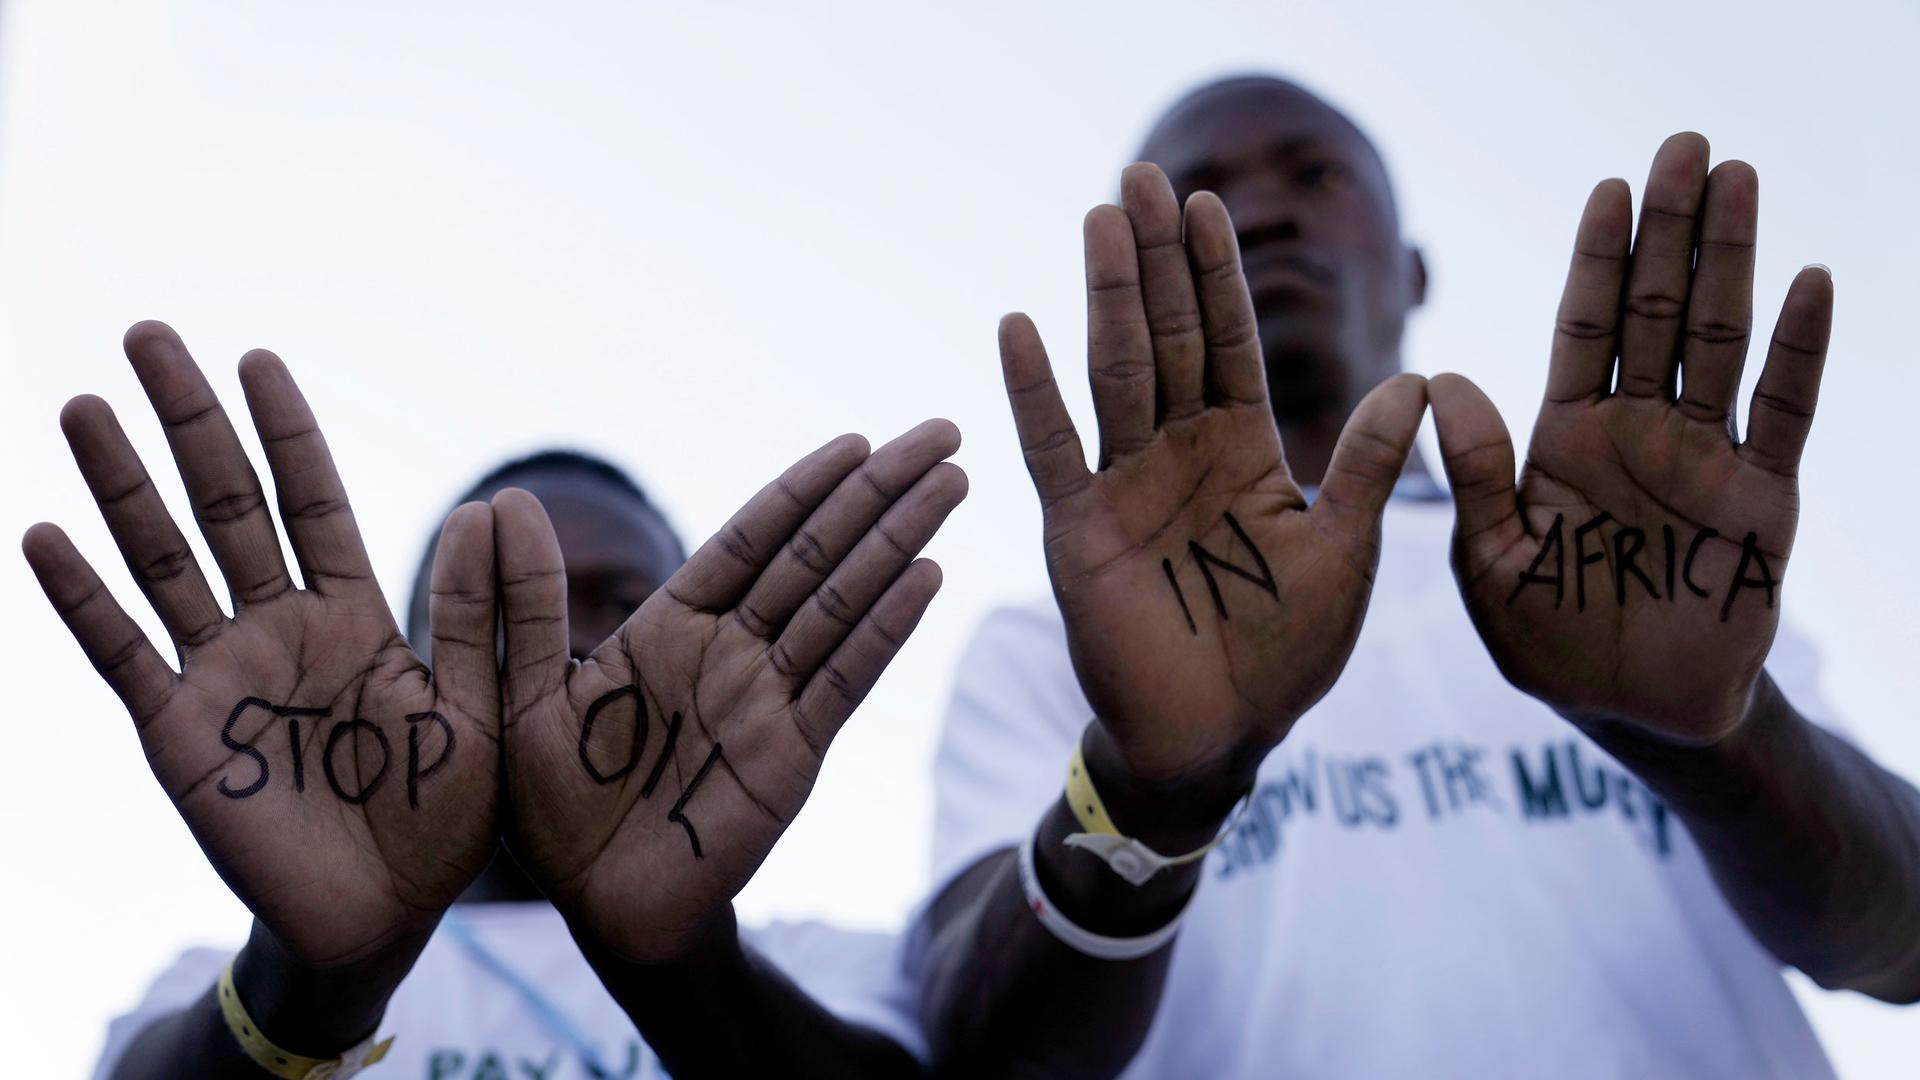 Demonstrators show "stop oil in Africa" written on their hands during a protest with Stop Pipelines coalition against pipelines in East Africa.